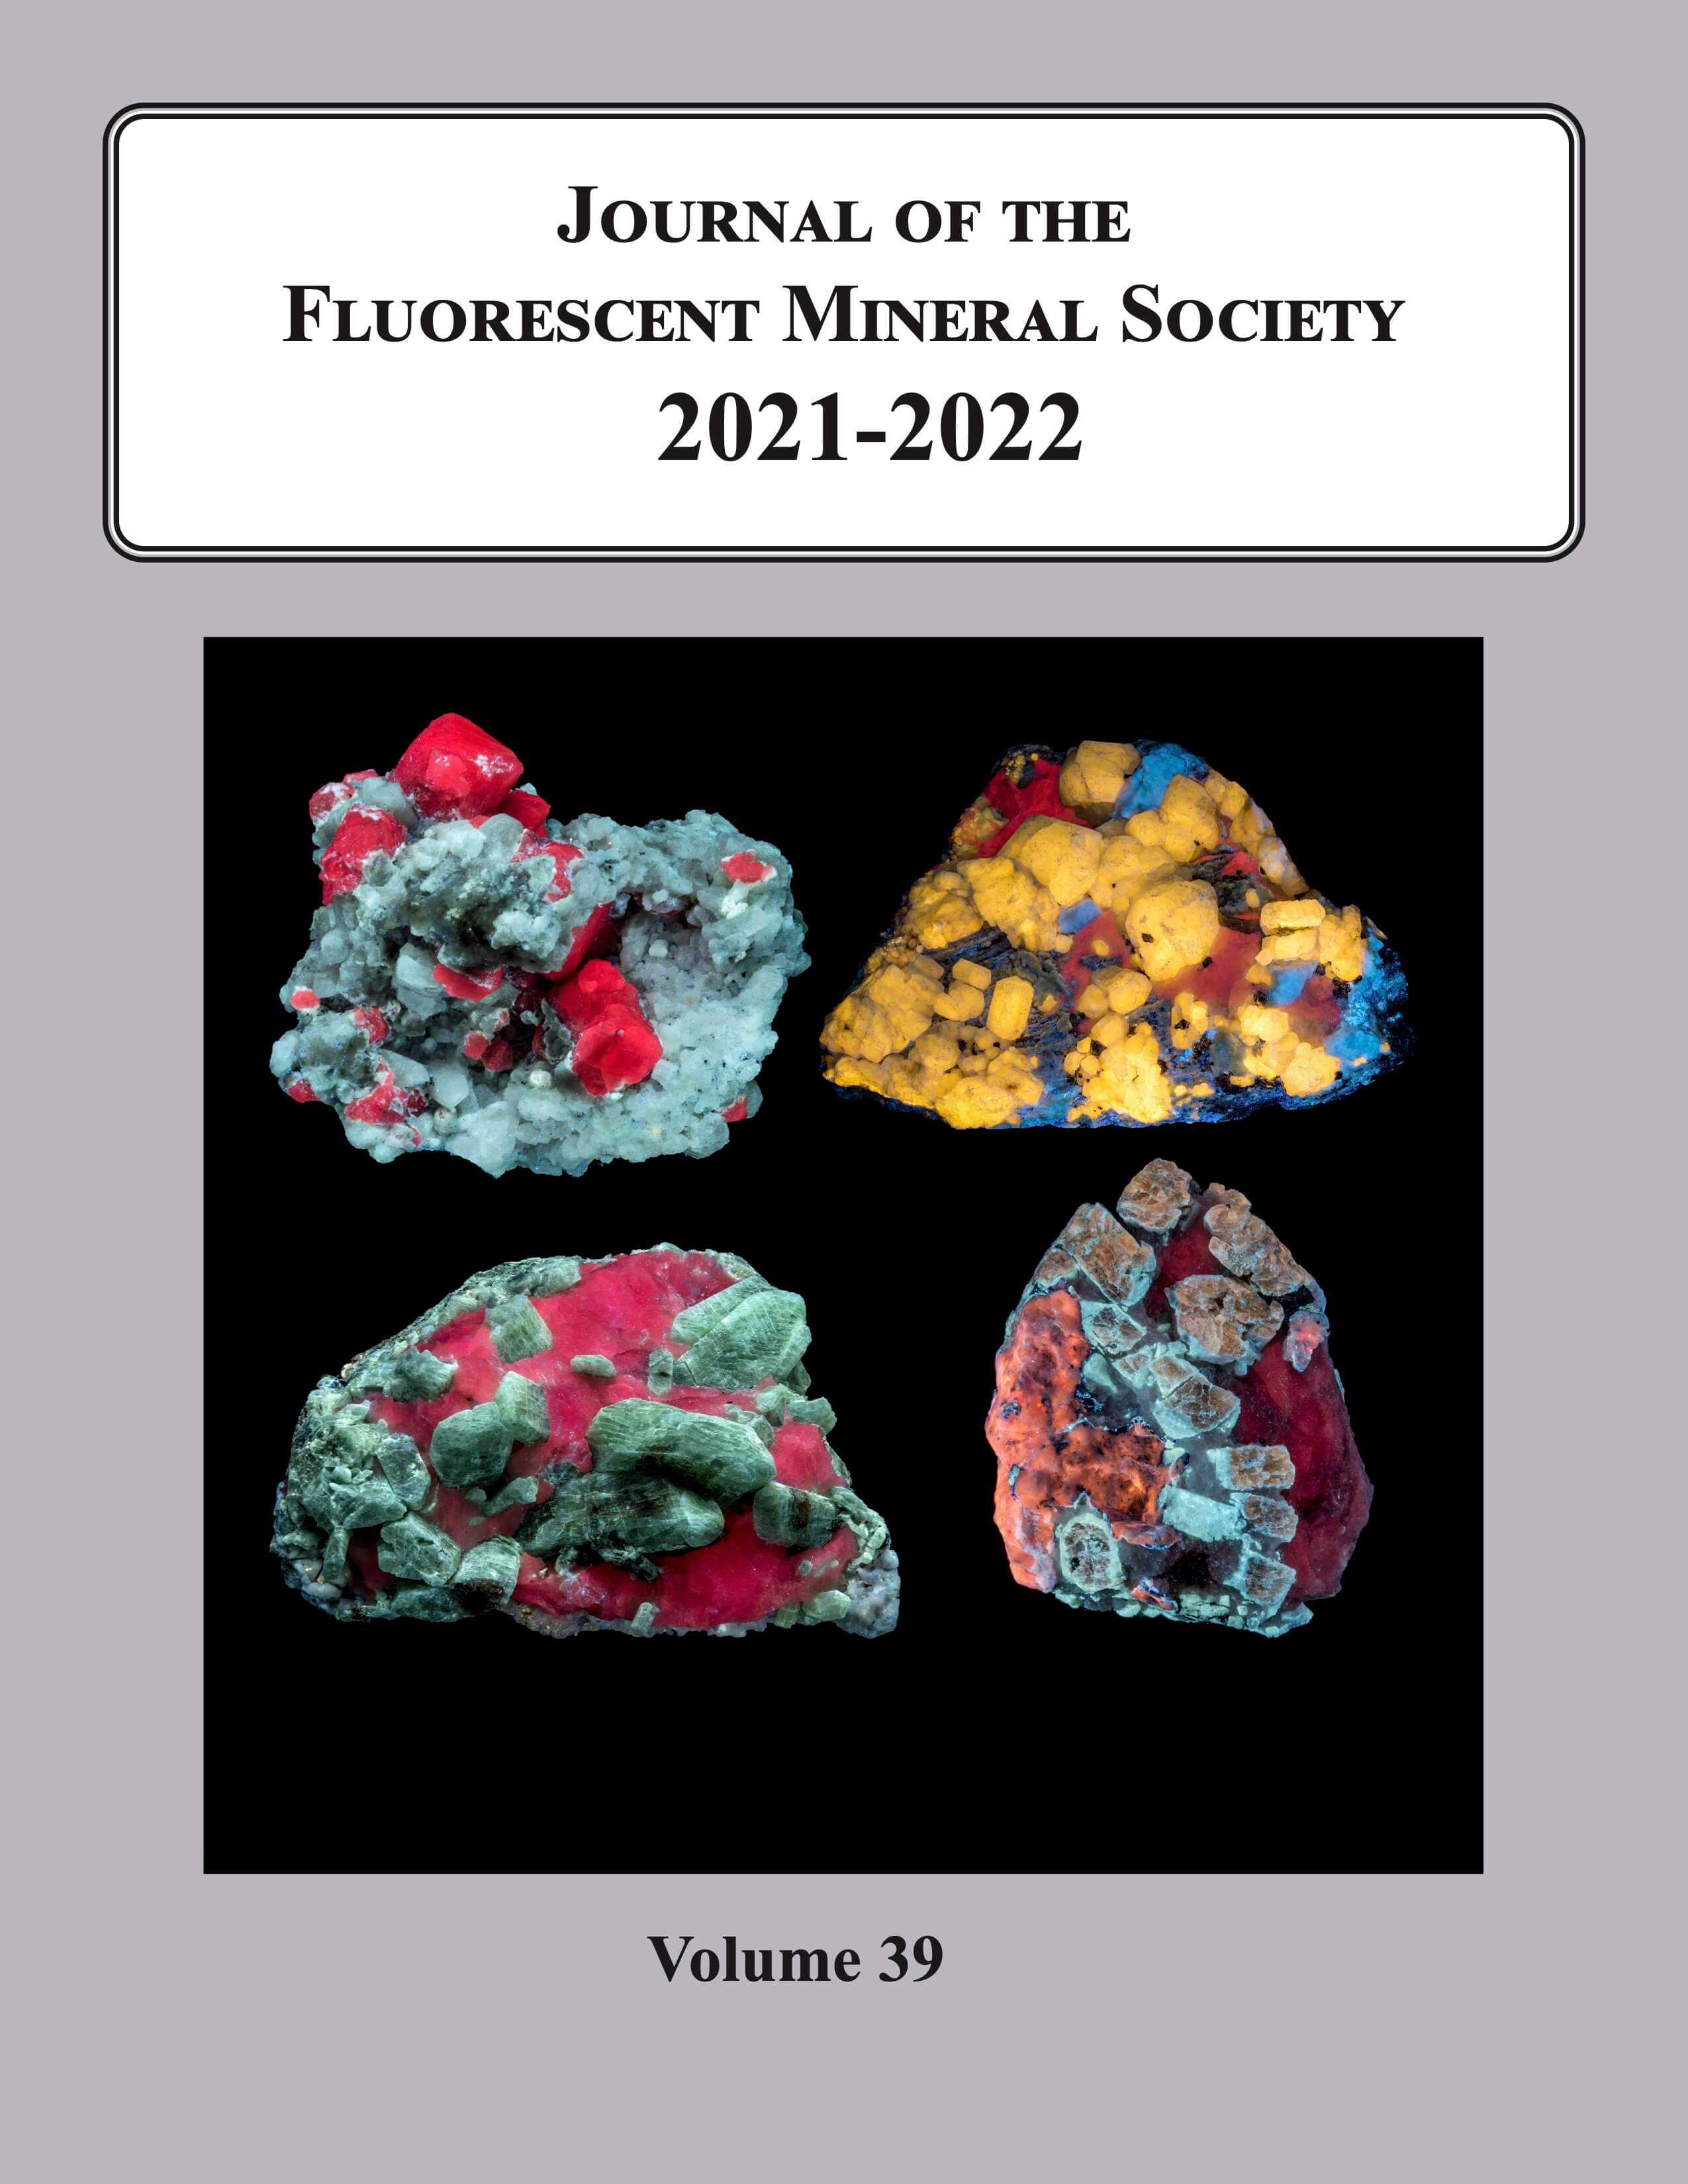 Journal of The Fluorescent Mineral Society cover page